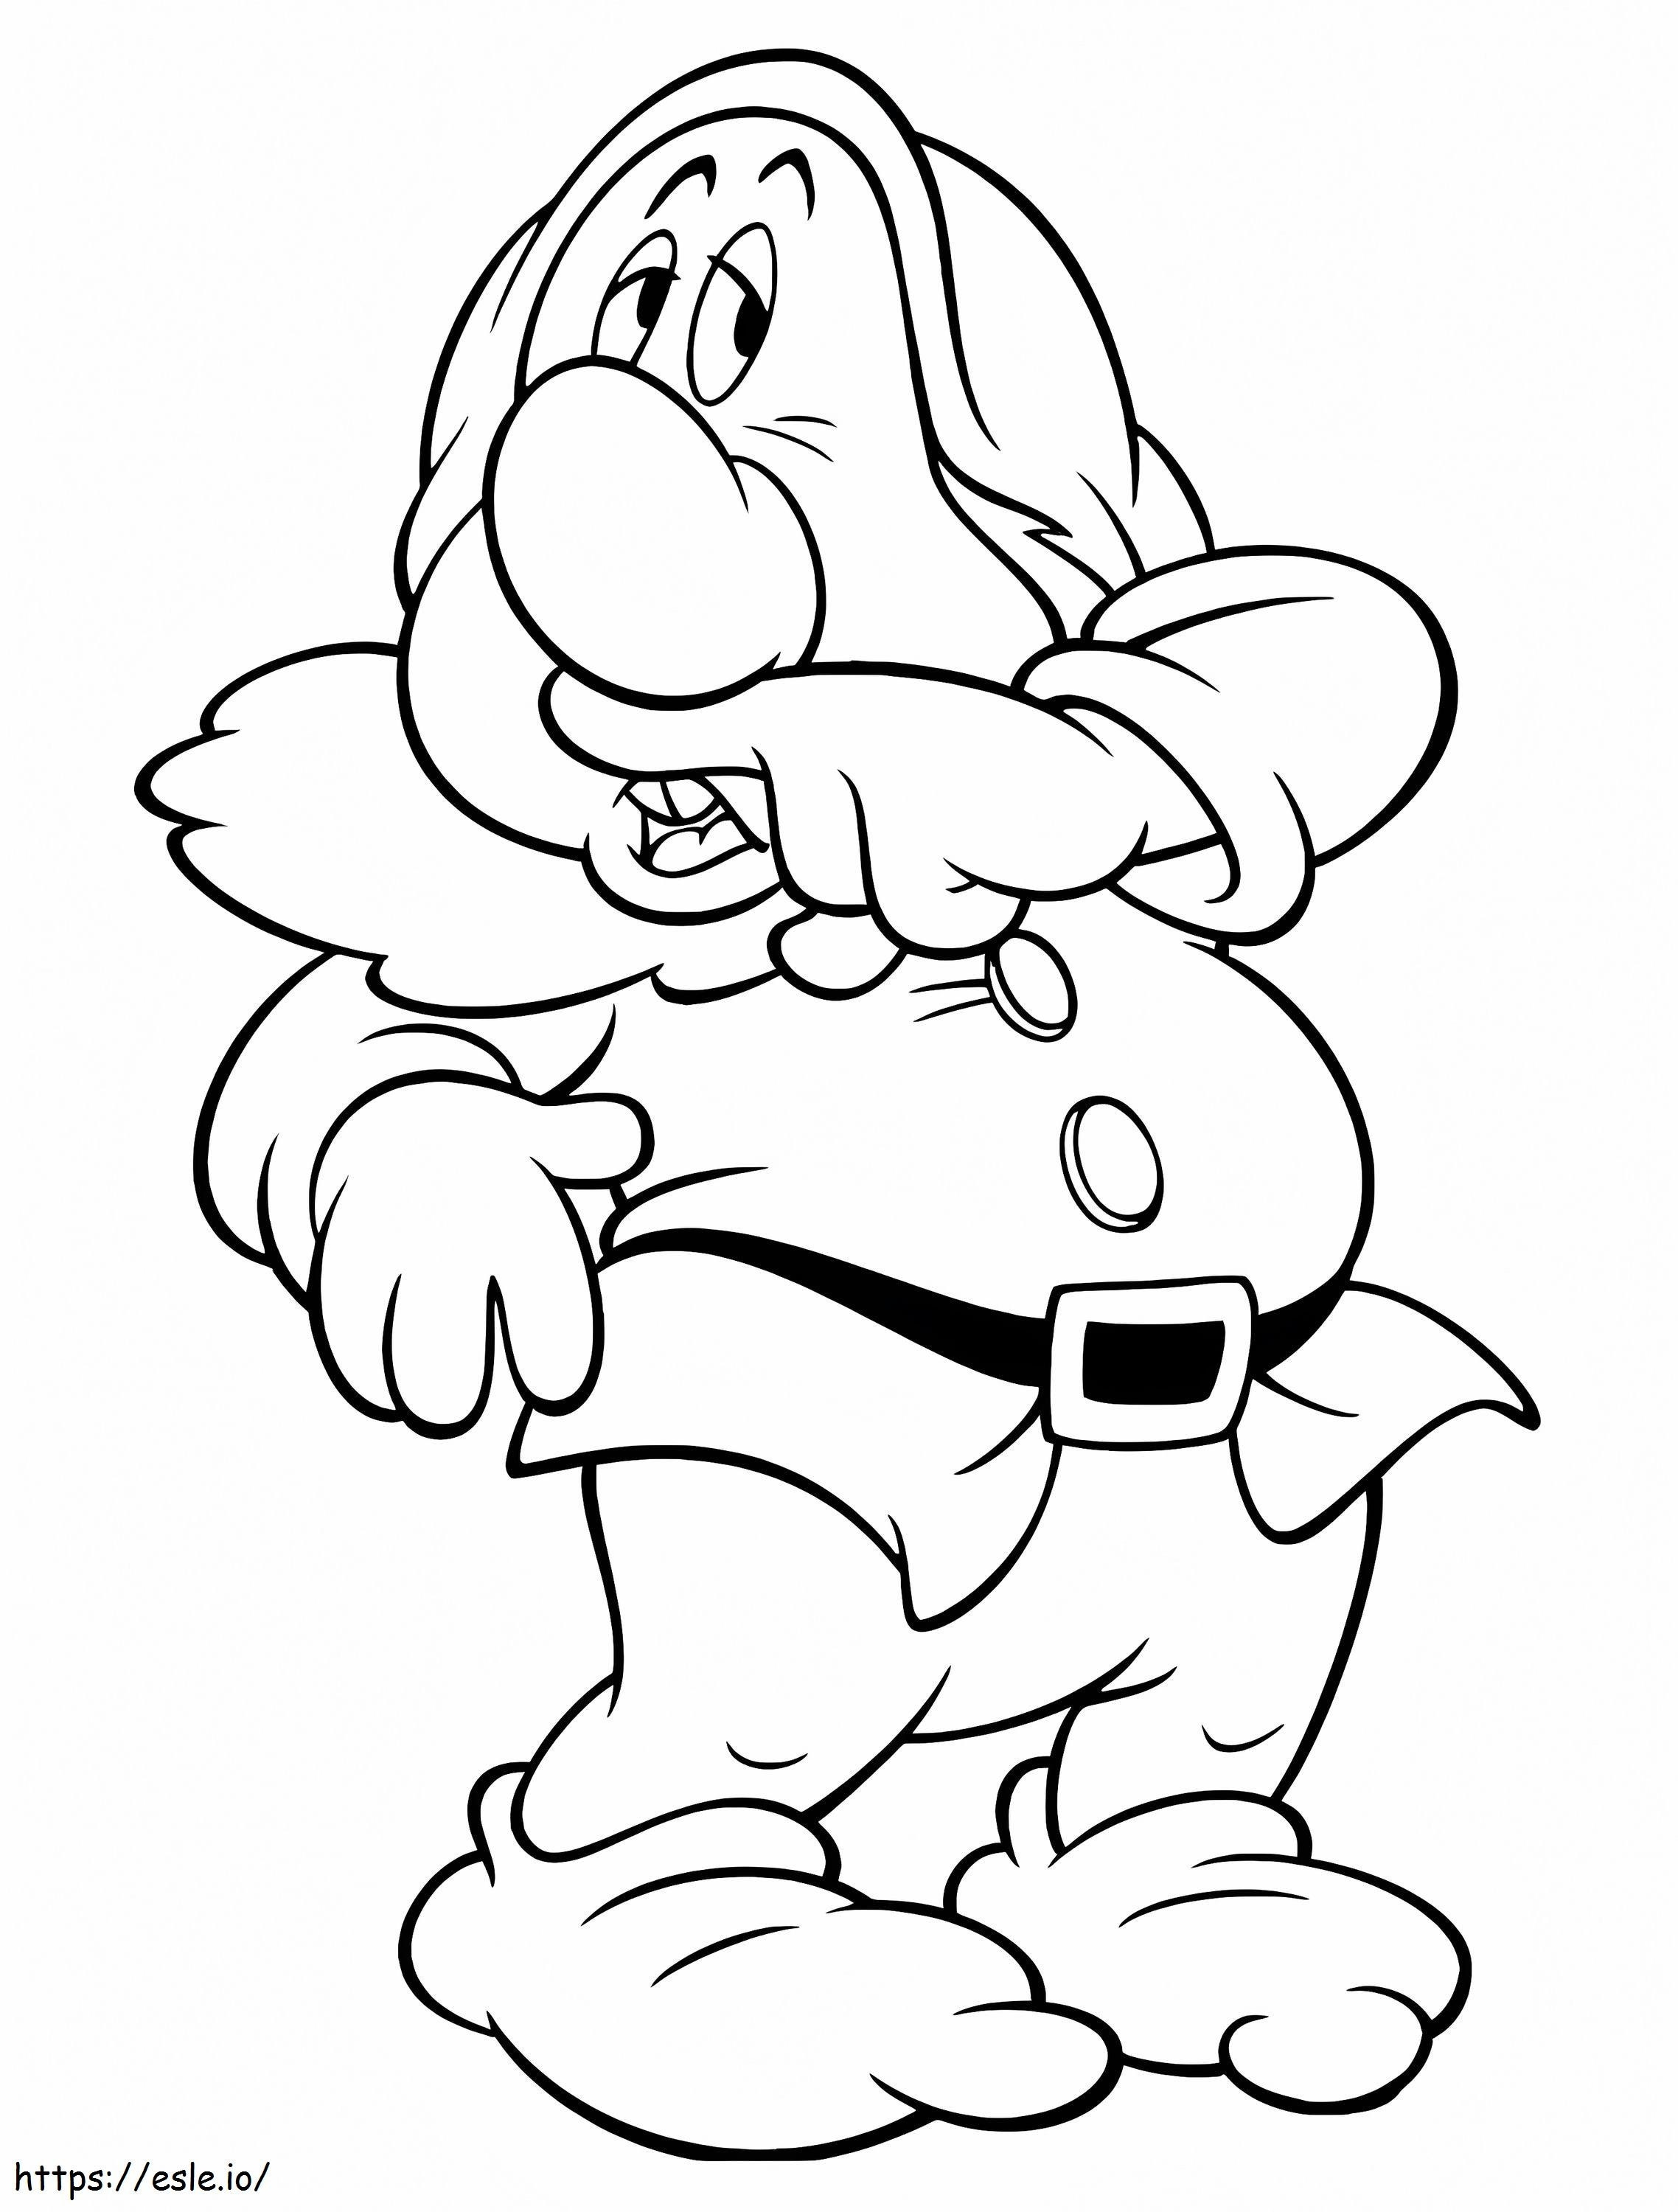 Sneezy Dwarf 1 coloring page